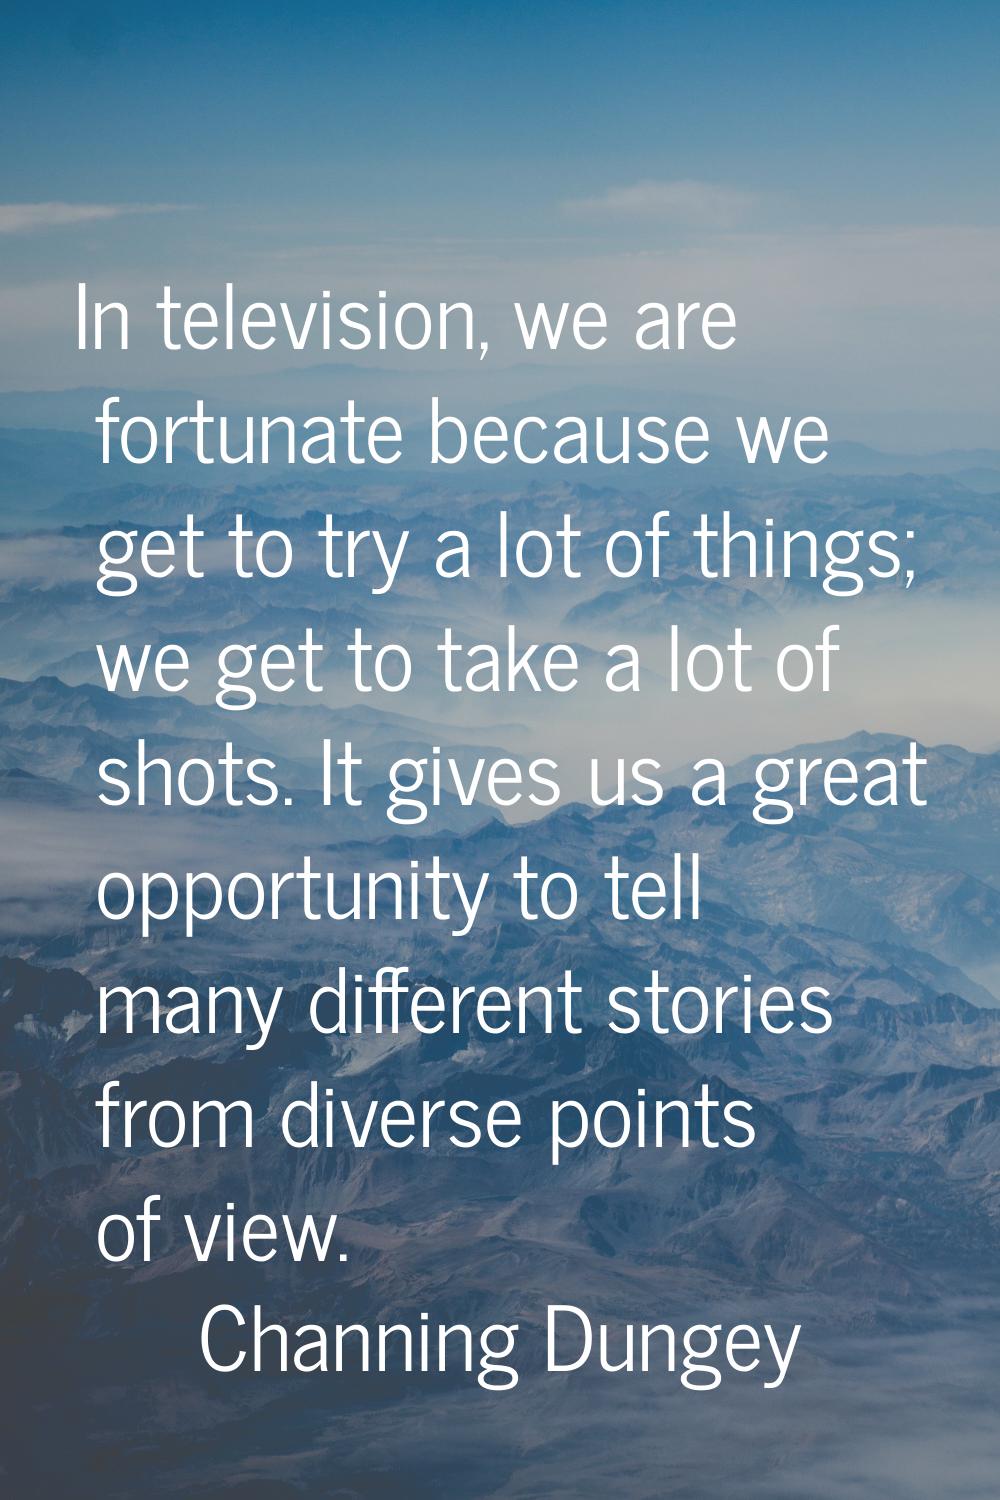 In television, we are fortunate because we get to try a lot of things; we get to take a lot of shot